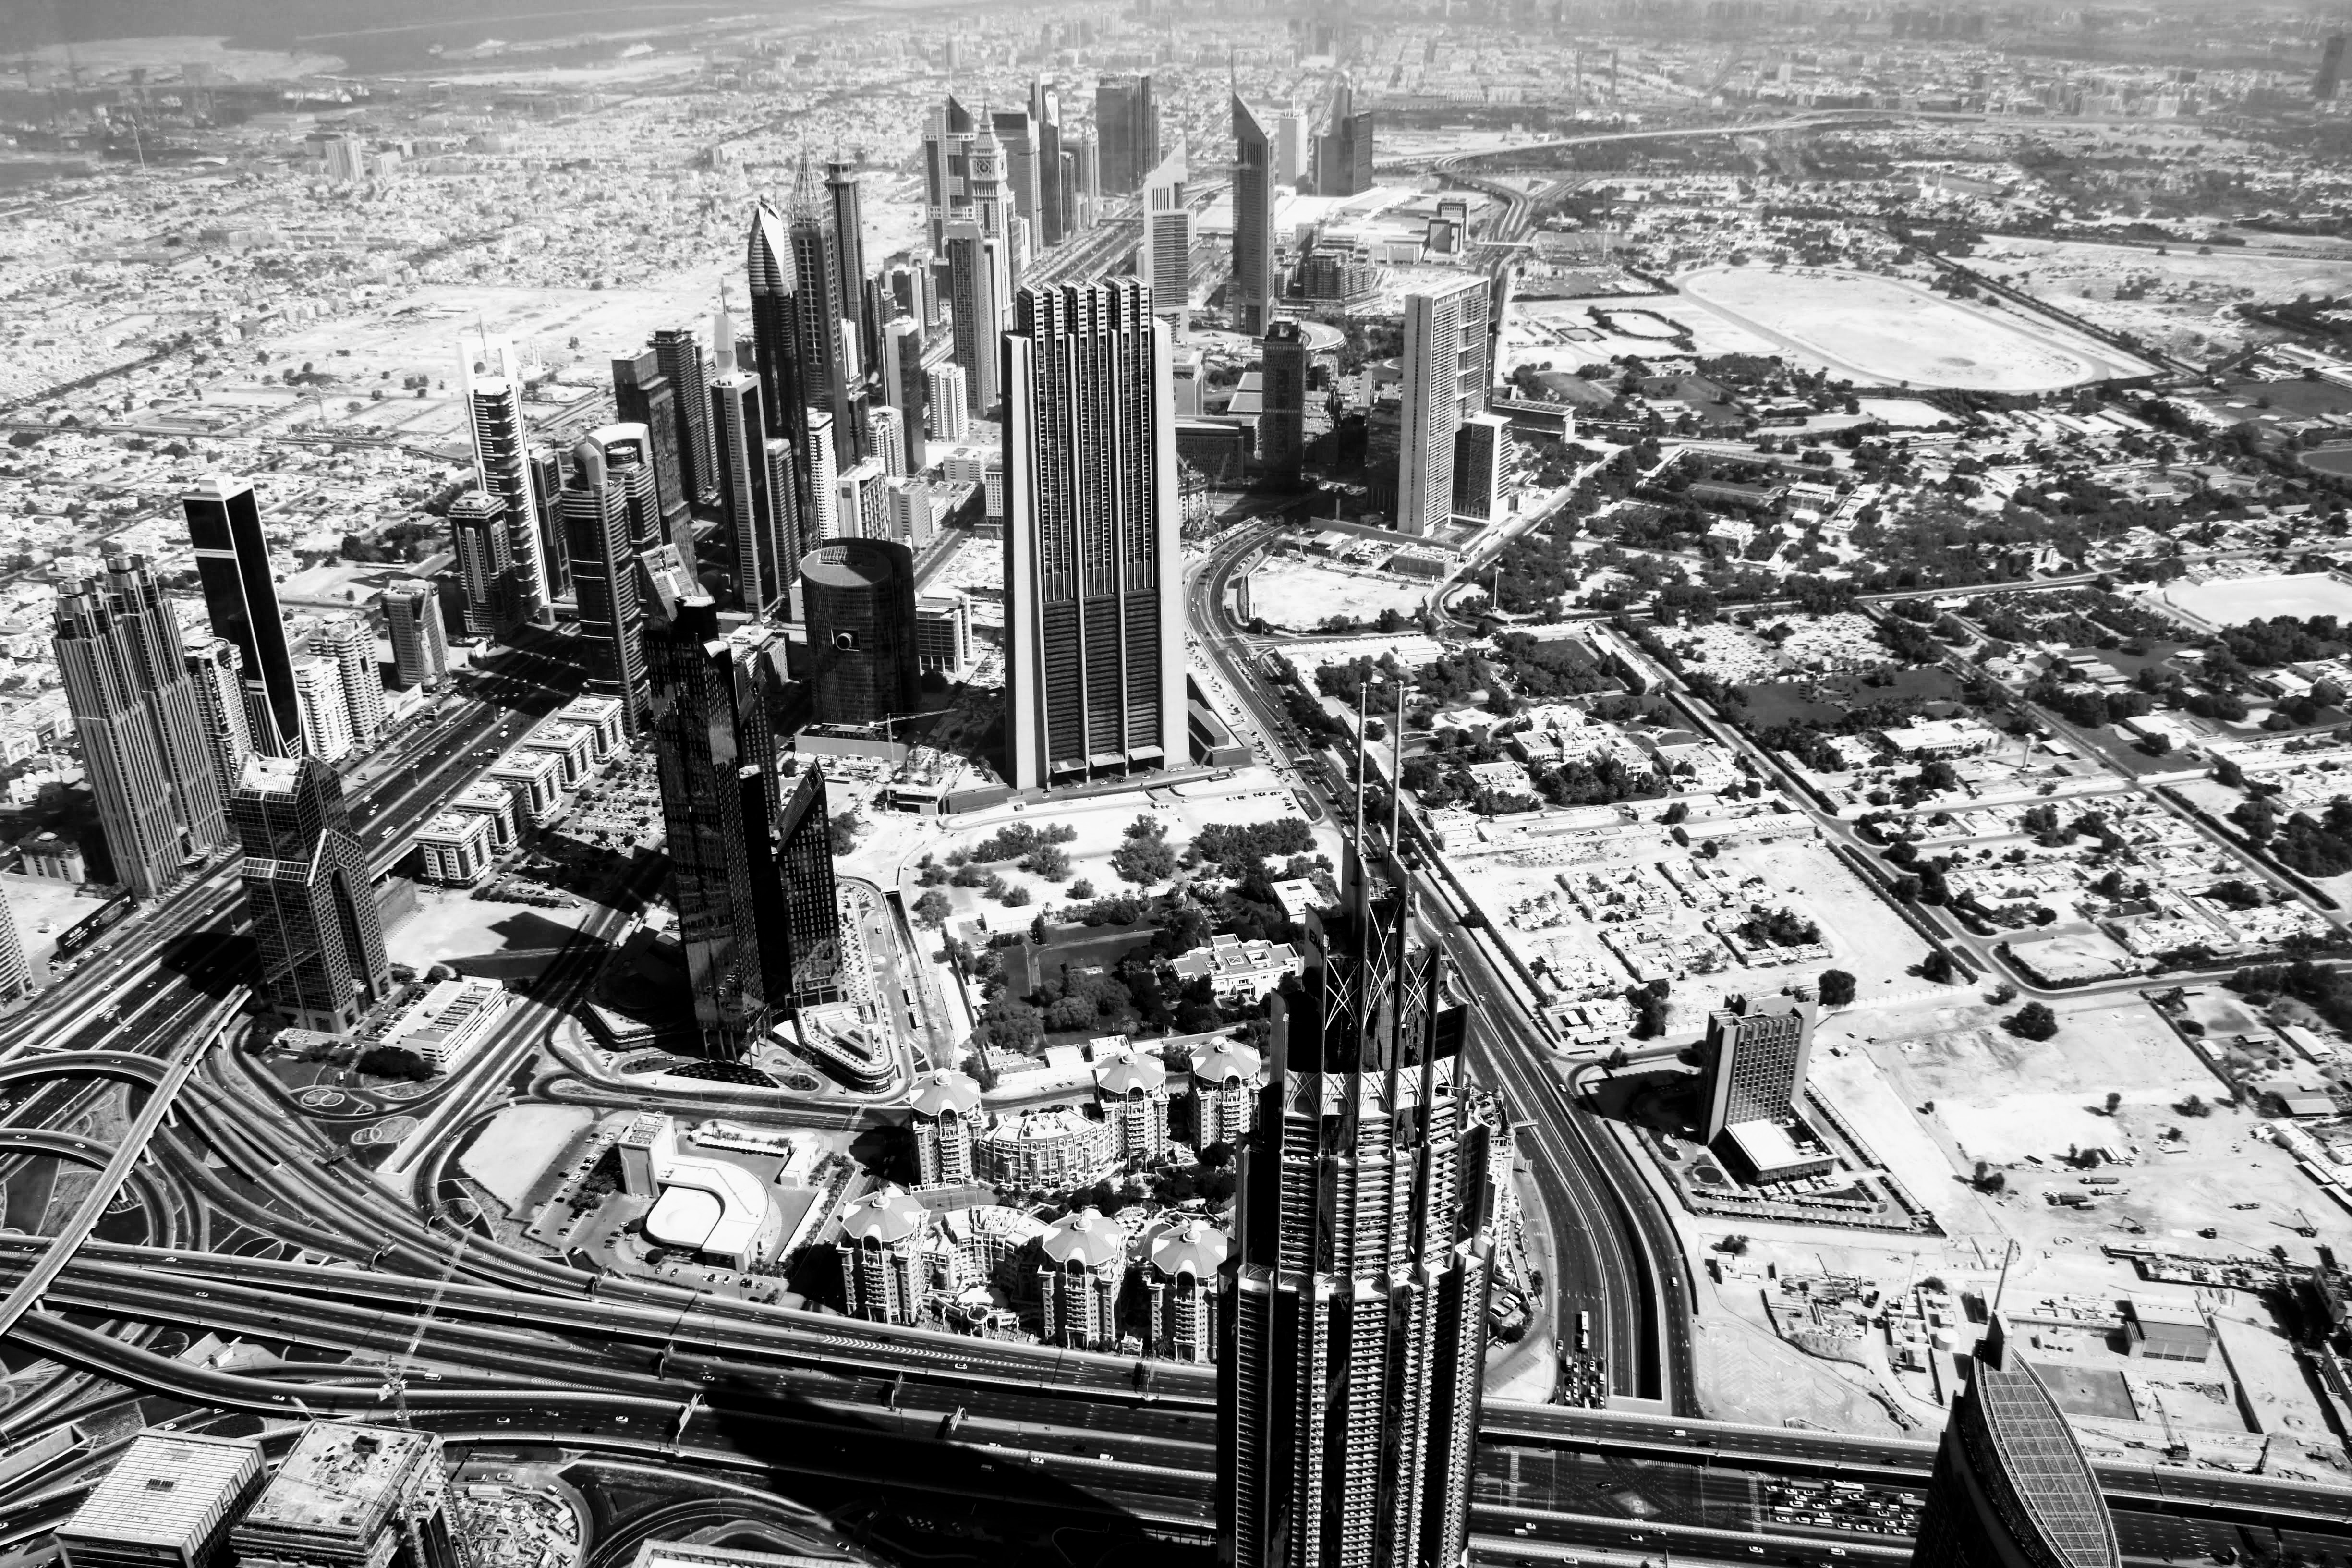 View from the Burj Khalifa tower of Dubai from below. Stunning and full of skyscrappers. CC: Jasmine Nears-Biesinger This work by Jasmine Nears is licensed under a Creative Commons Attribution-ShareAlike 4.0 International License